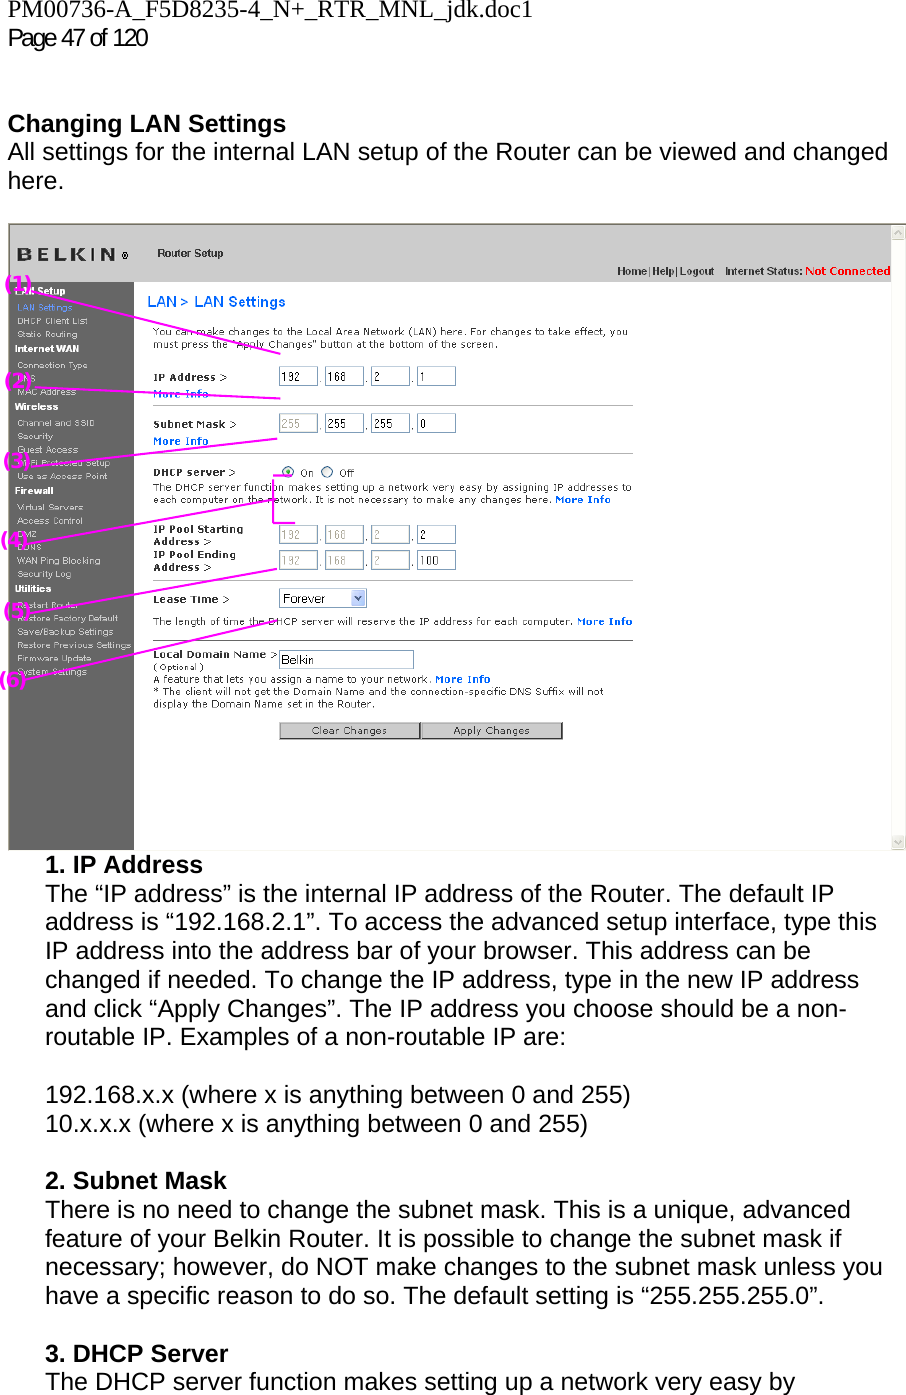 PM00736-A_F5D8235-4_N+_RTR_MNL_jdk.doc1  Page 47 of 120    Changing LAN Settings  All settings for the internal LAN setup of the Router can be viewed and changed here.   1. IP Address  The “IP address” is the internal IP address of the Router. The default IP address is “192.168.2.1”. To access the advanced setup interface, type this IP address into the address bar of your browser. This address can be changed if needed. To change the IP address, type in the new IP address and click “Apply Changes”. The IP address you choose should be a non-routable IP. Examples of a non-routable IP are:  192.168.x.x (where x is anything between 0 and 255) 10.x.x.x (where x is anything between 0 and 255)  2. Subnet Mask  There is no need to change the subnet mask. This is a unique, advanced feature of your Belkin Router. It is possible to change the subnet mask if necessary; however, do NOT make changes to the subnet mask unless you have a specific reason to do so. The default setting is “255.255.255.0”.  3. DHCP Server  The DHCP server function makes setting up a network very easy by (2) (3) (4) (5) (6) (1) 